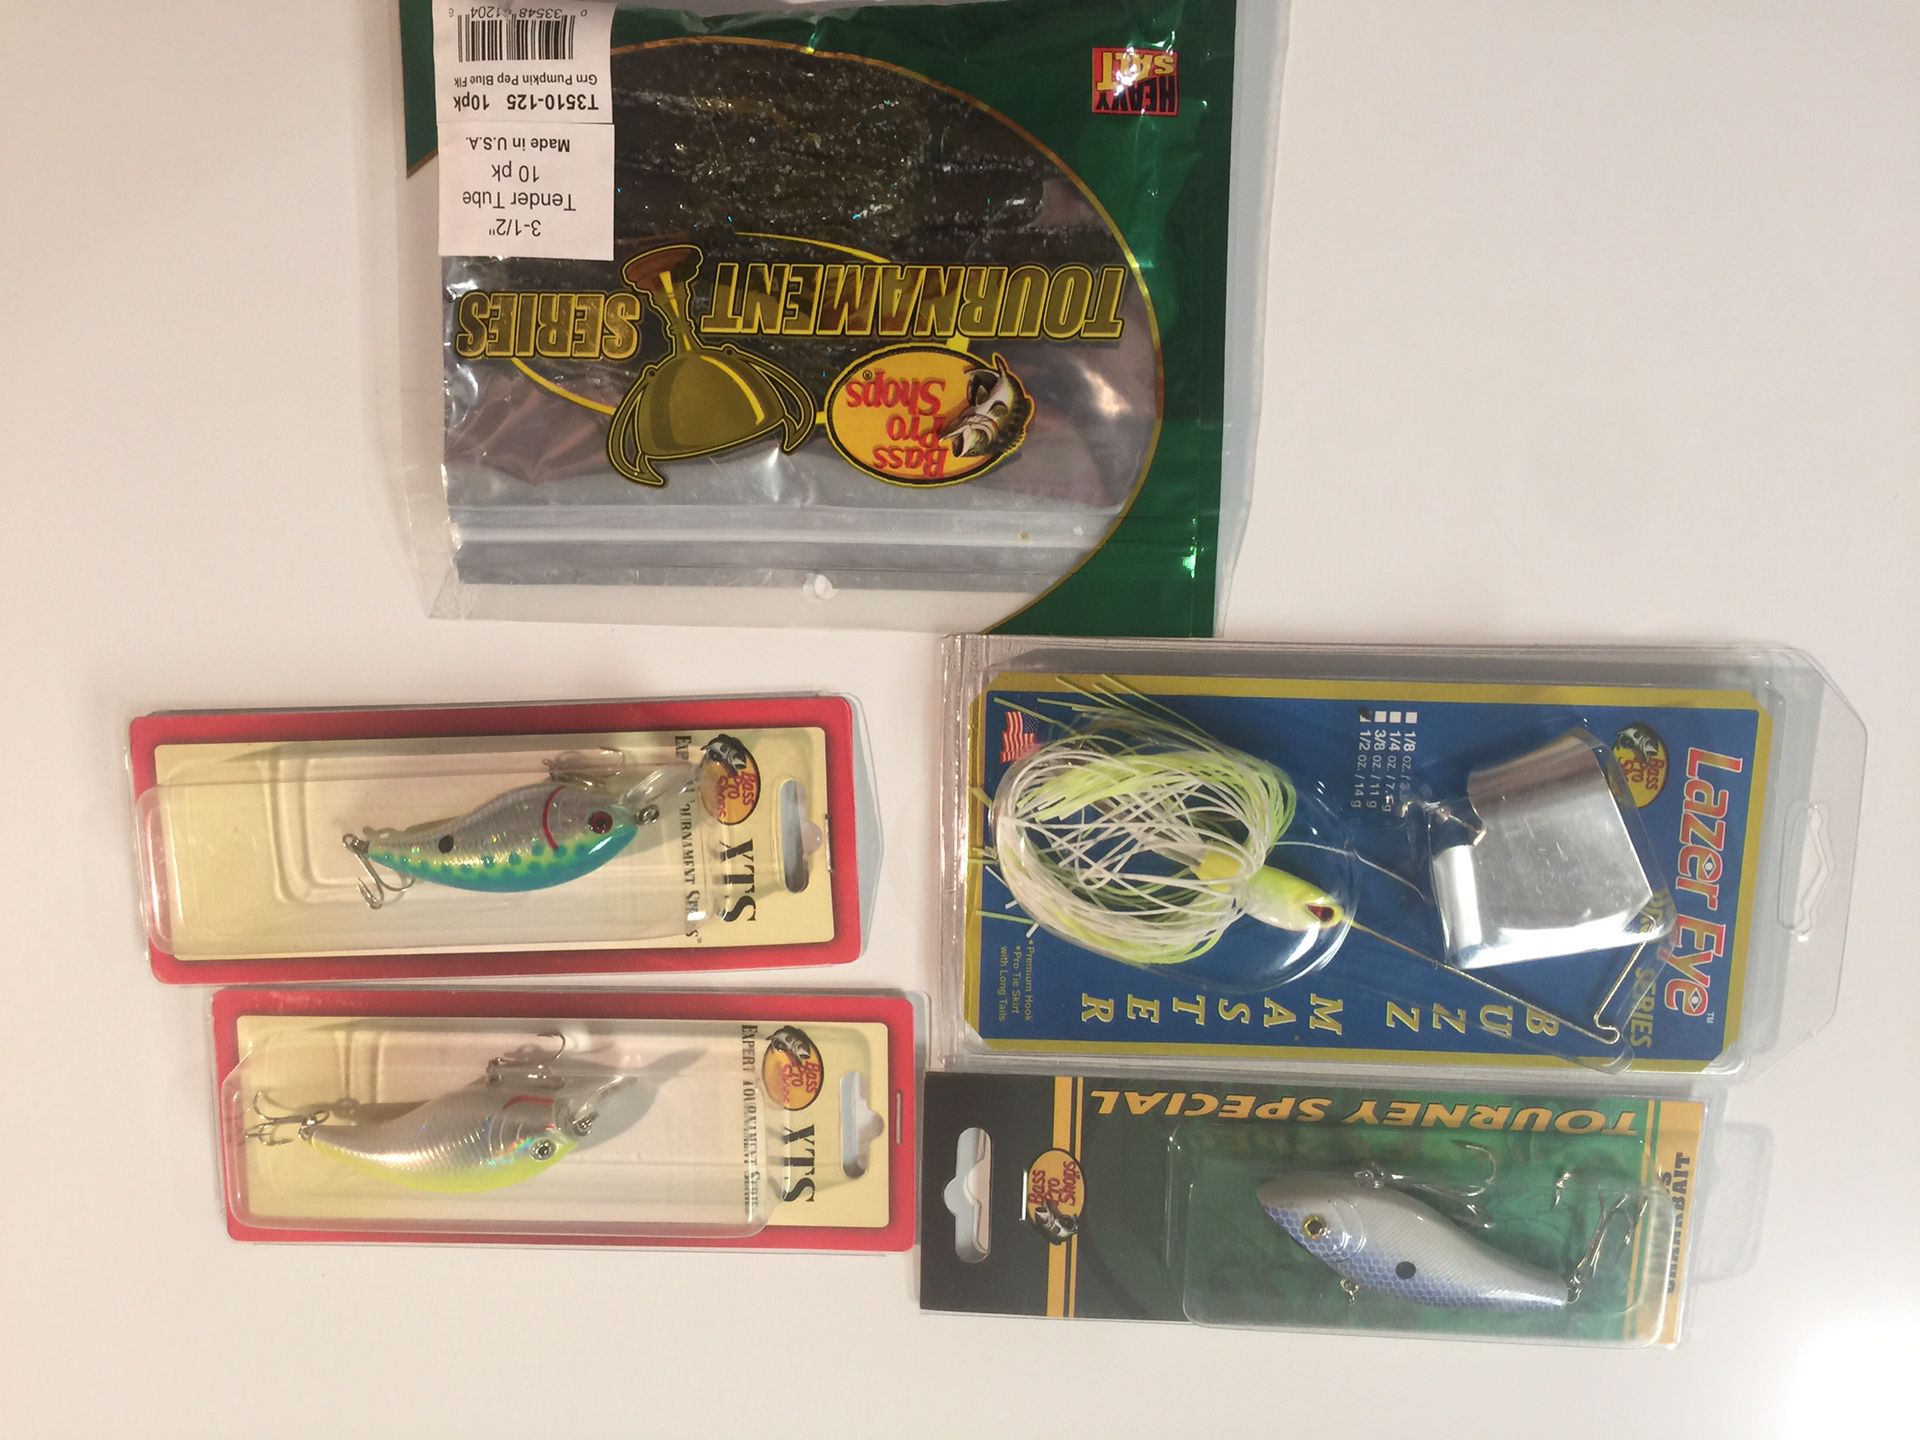 New fishing lures and plastic bait. #5 package